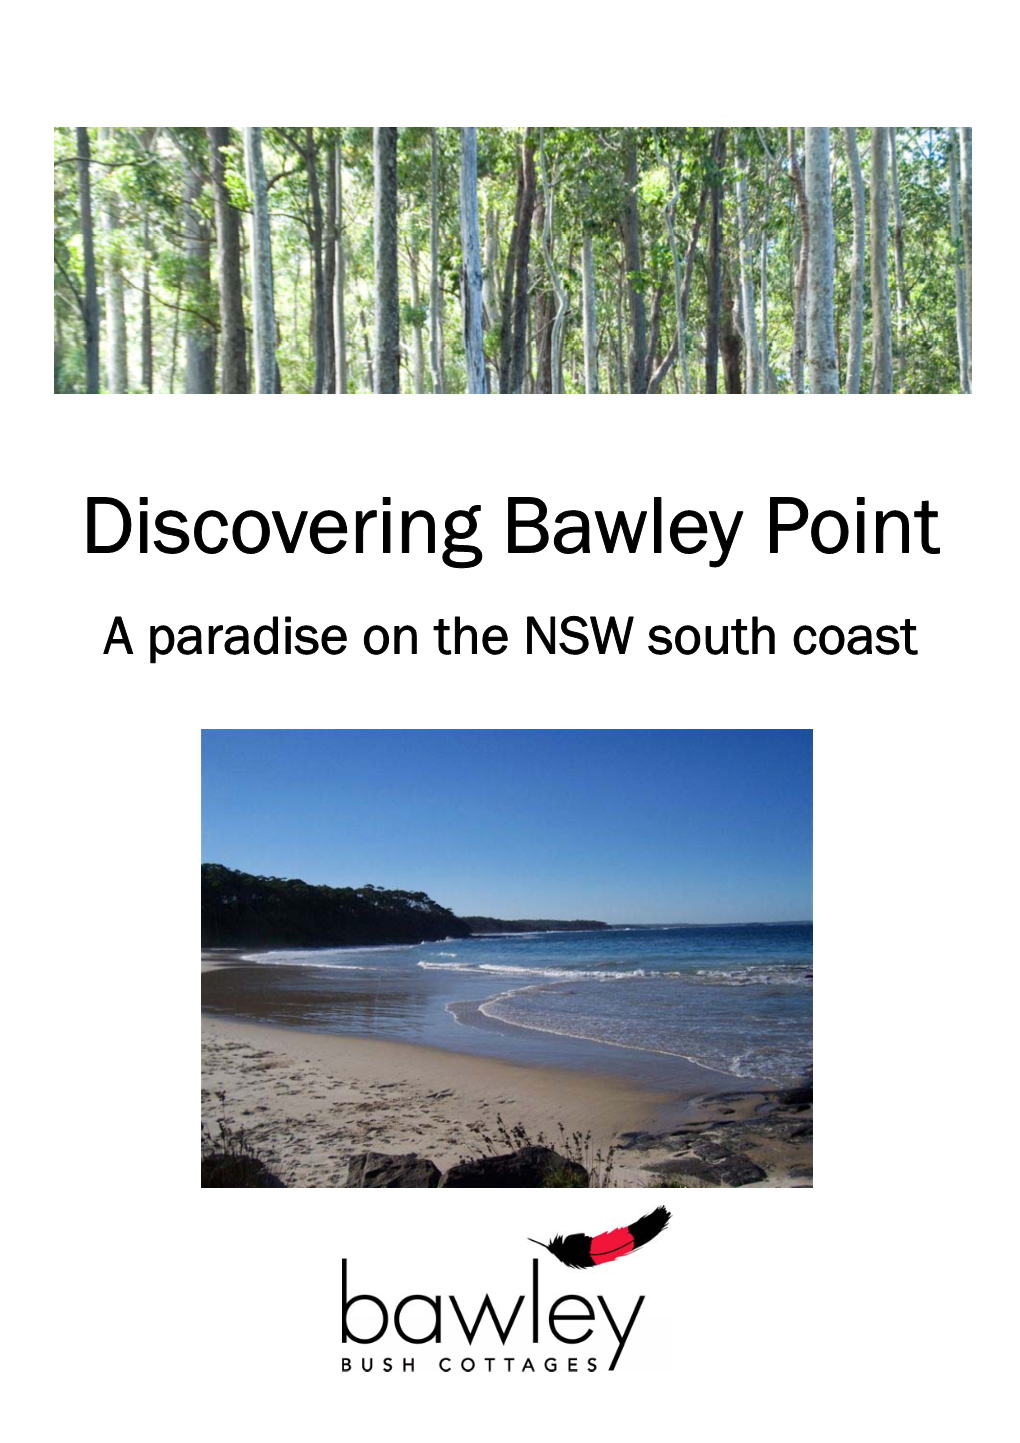 Discovering Bawley Point